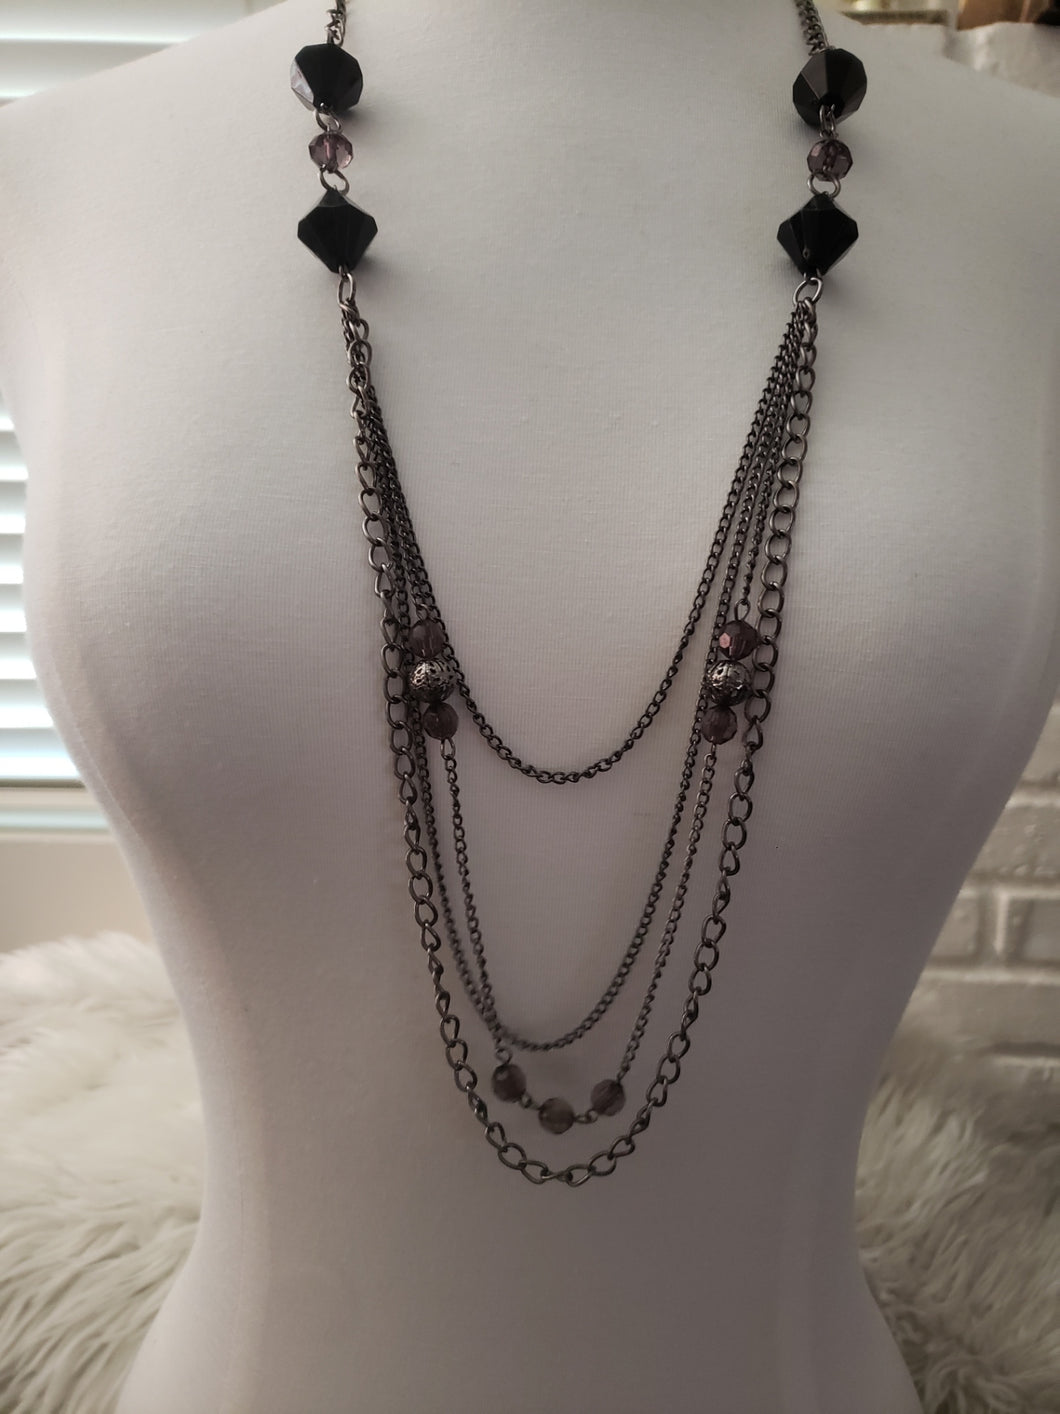 4 Layer Black Metal Chain Necklace with Diamond Shape and Small Round Beads